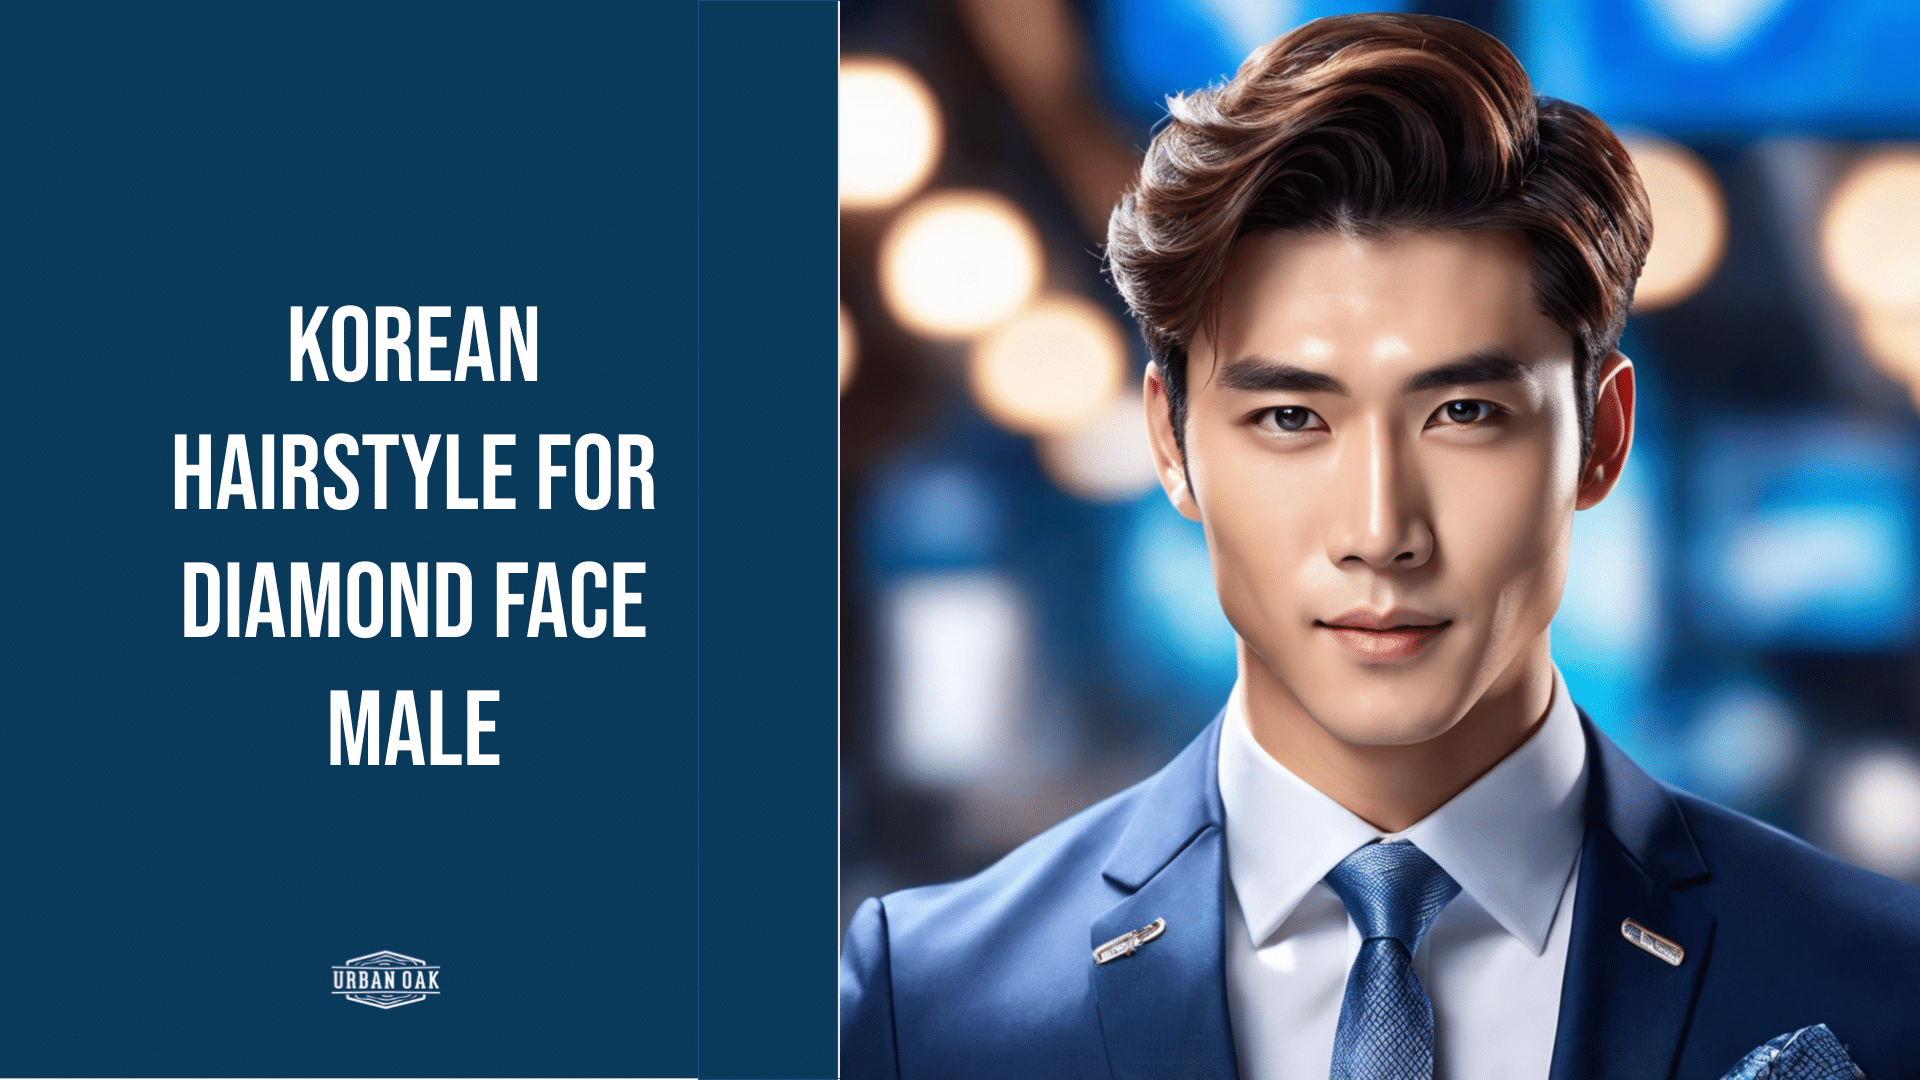 Korean hairstyle for diamond face male